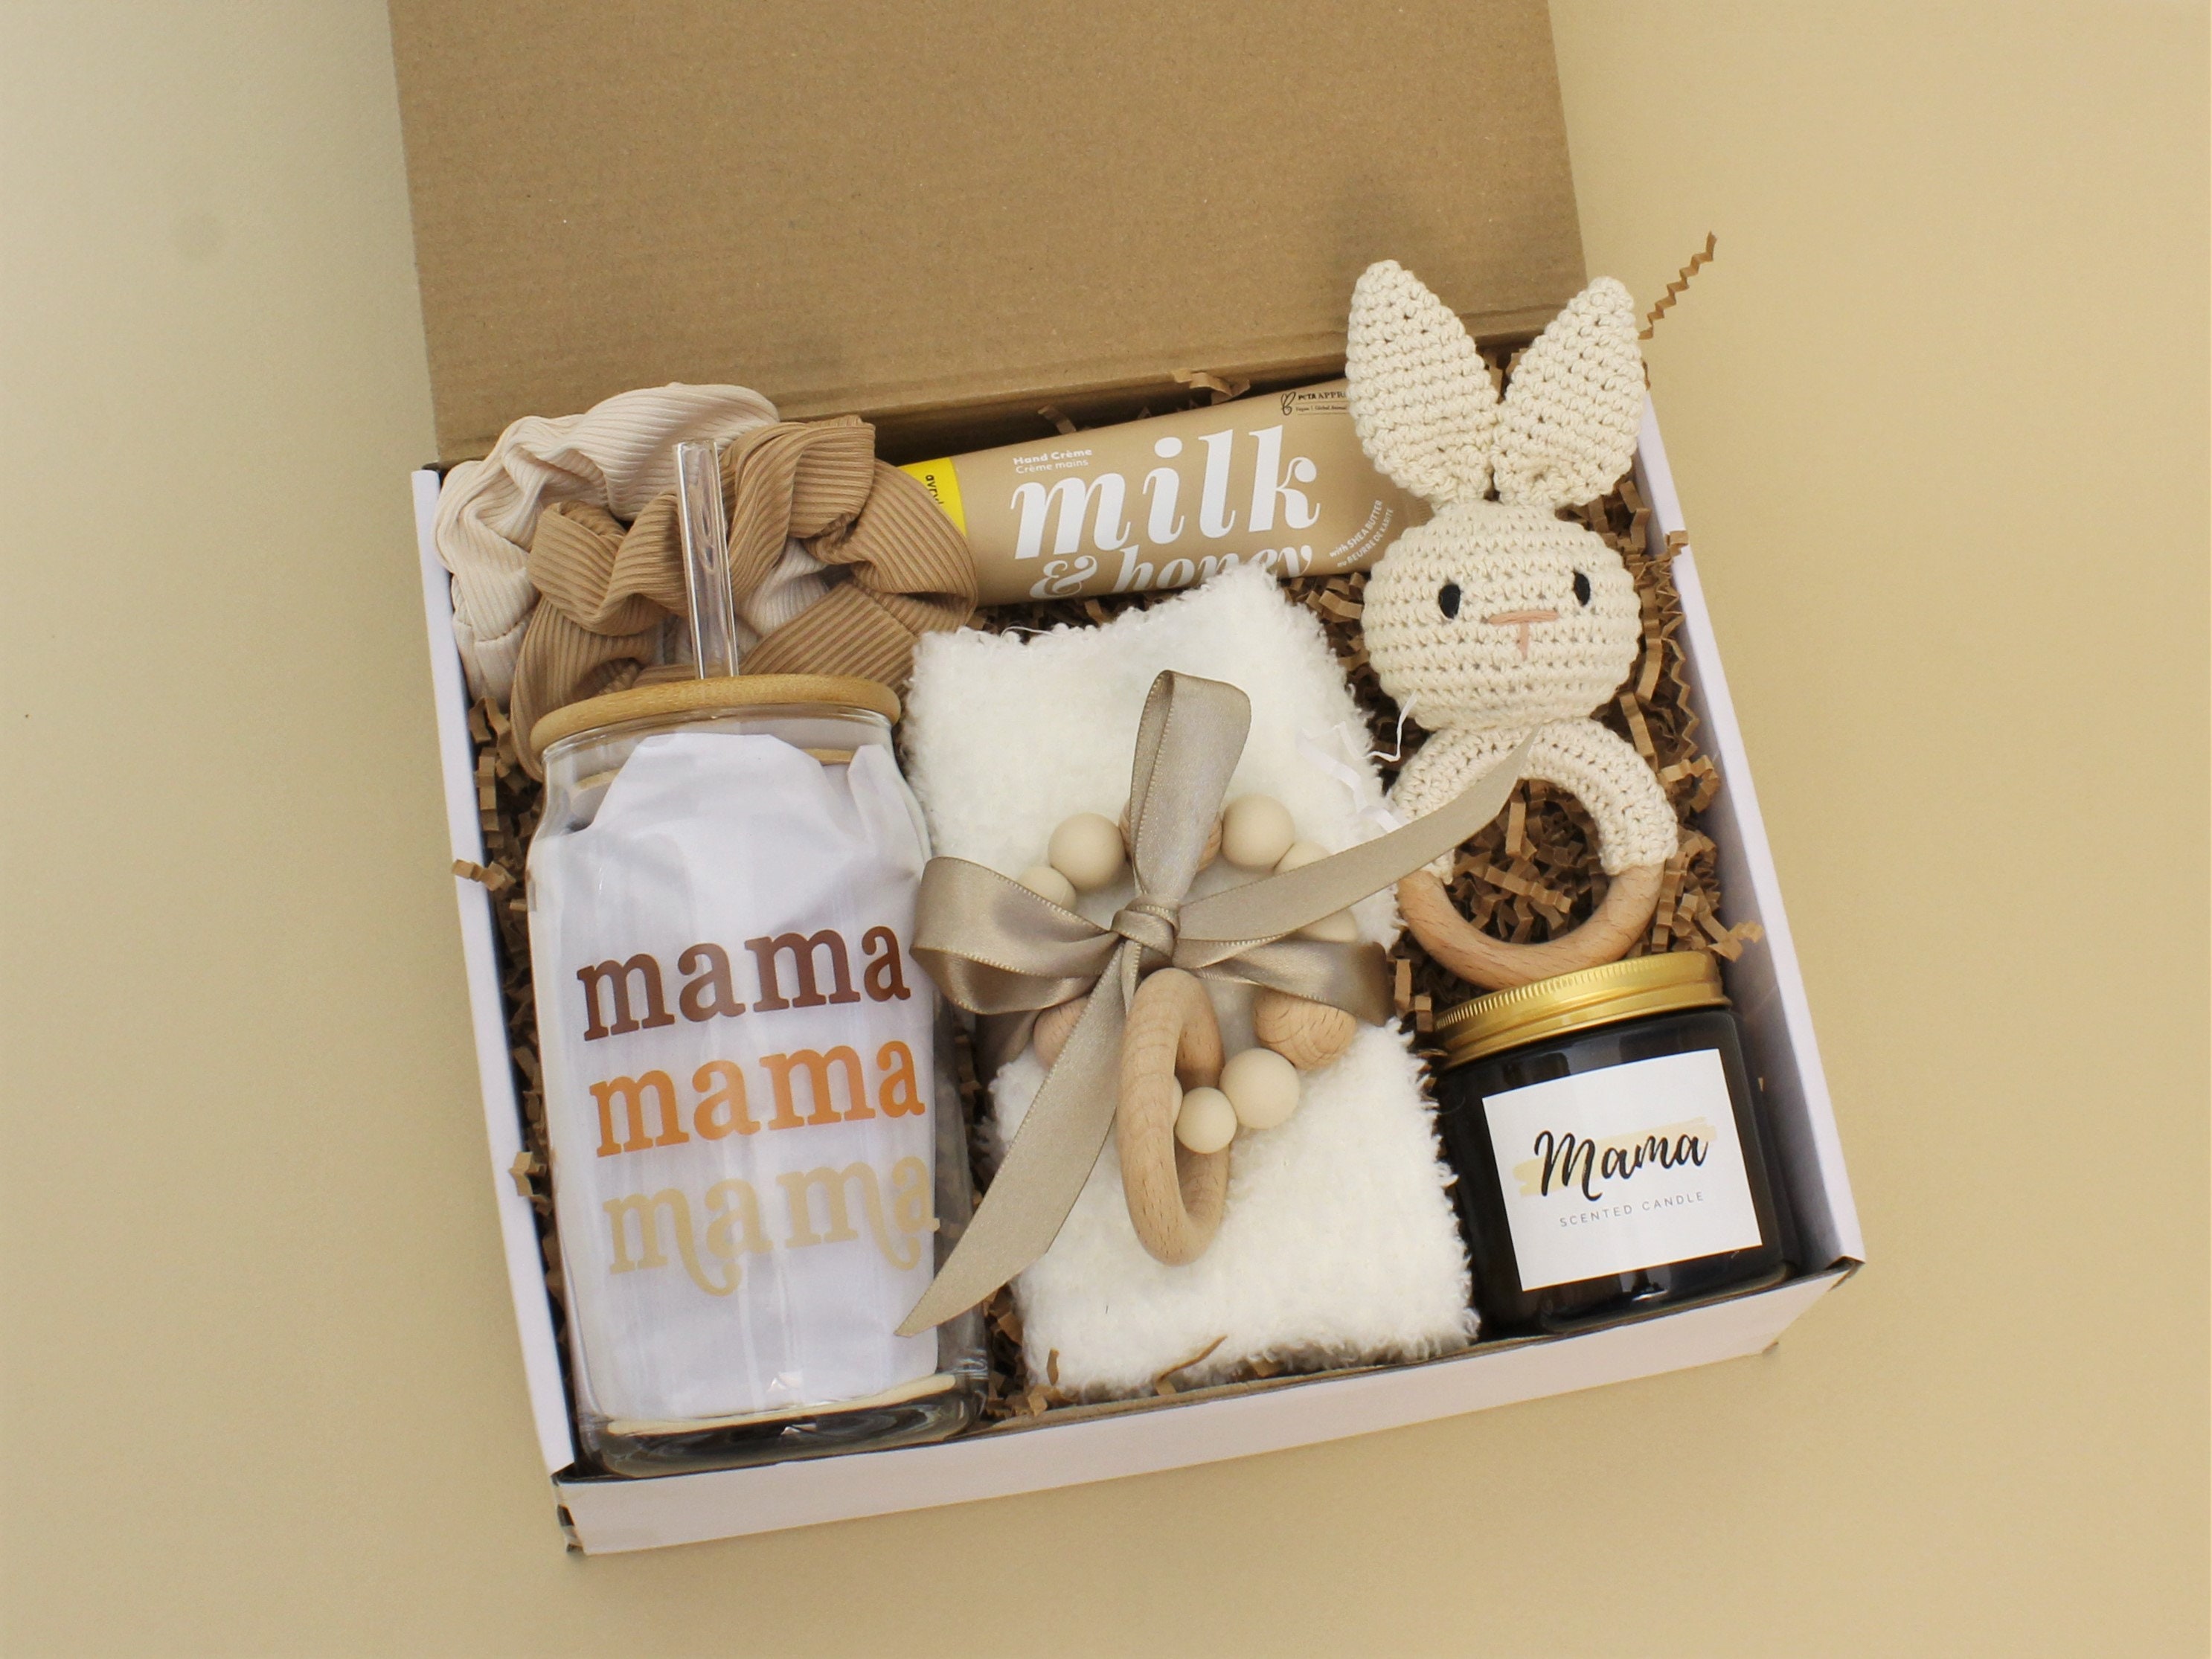 New Mom Gifts That Aren't About the Baby — Just In Time for the